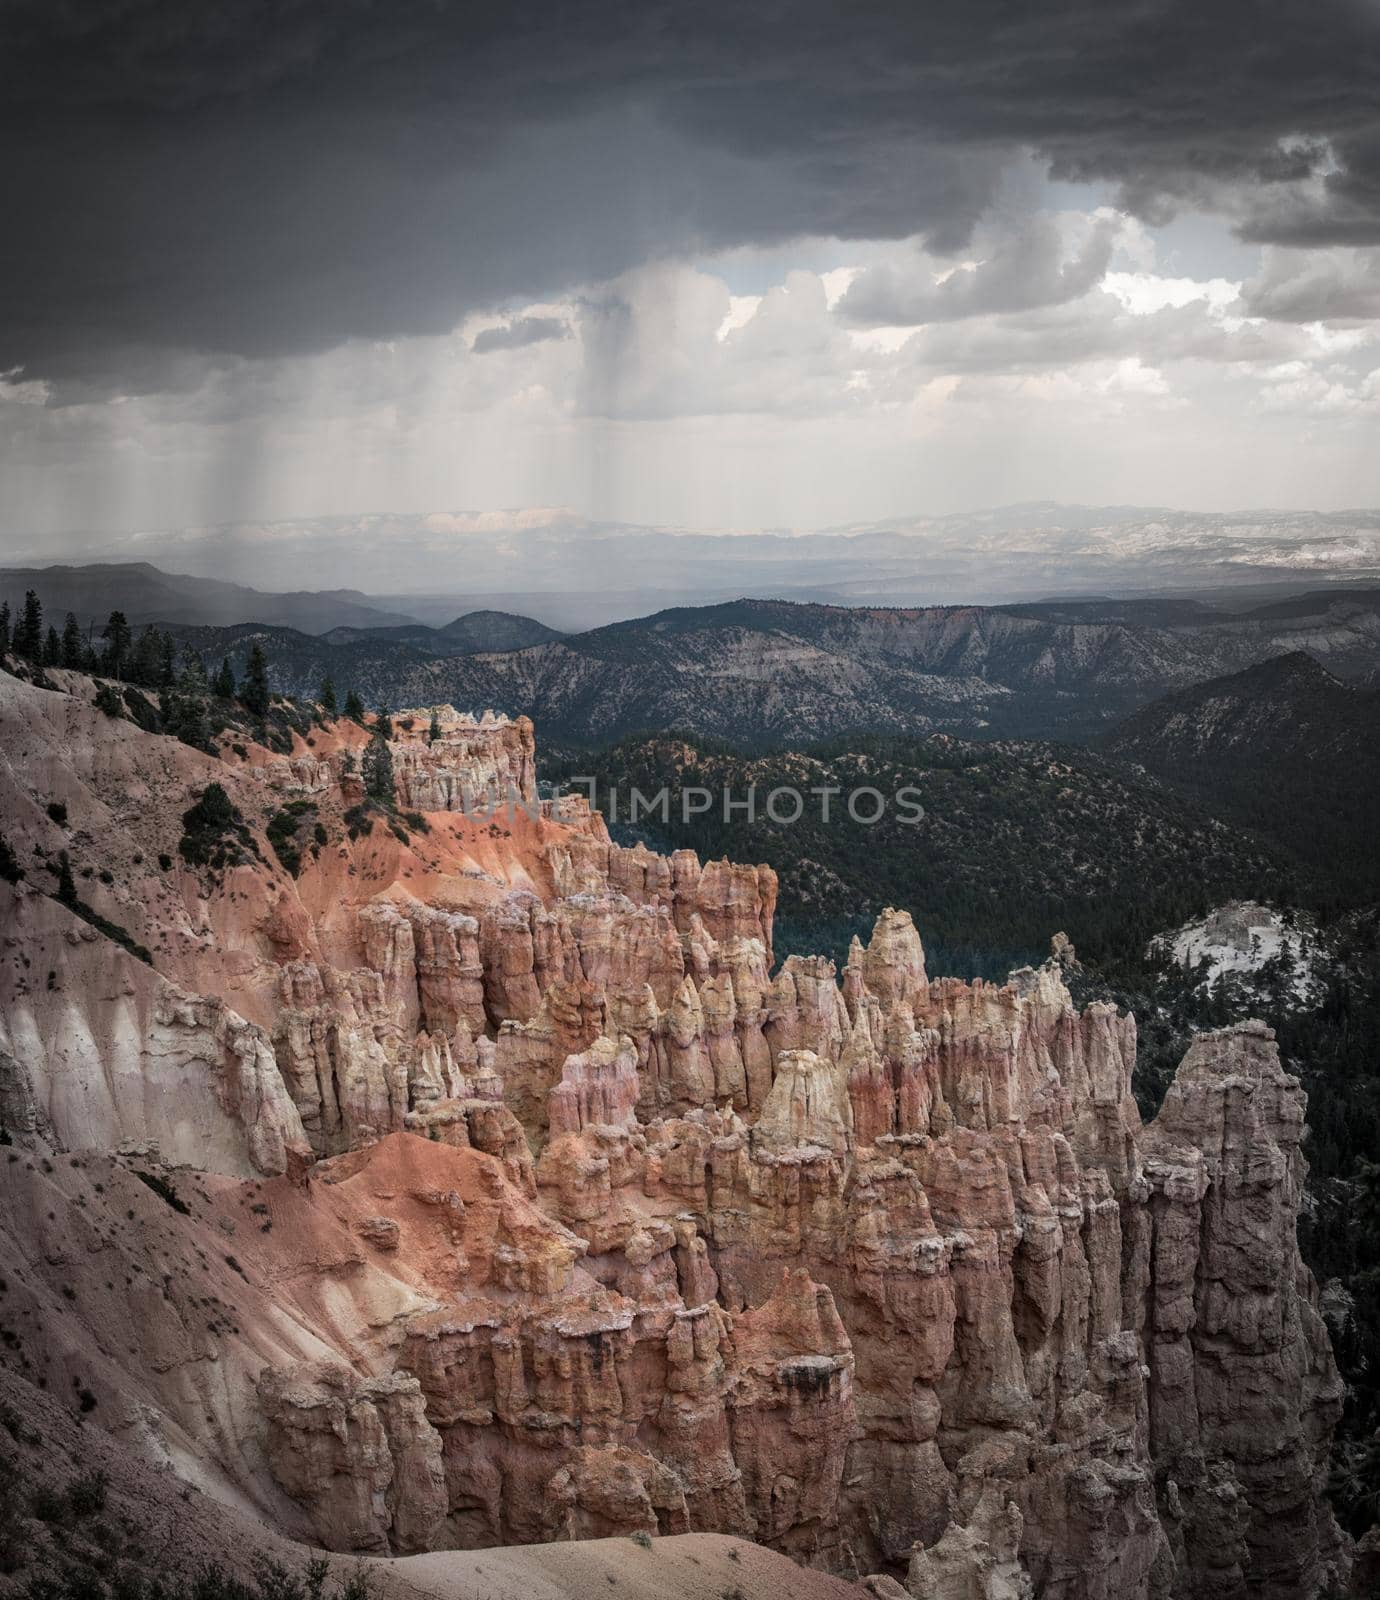 Thunder storms over Bryce Wonder